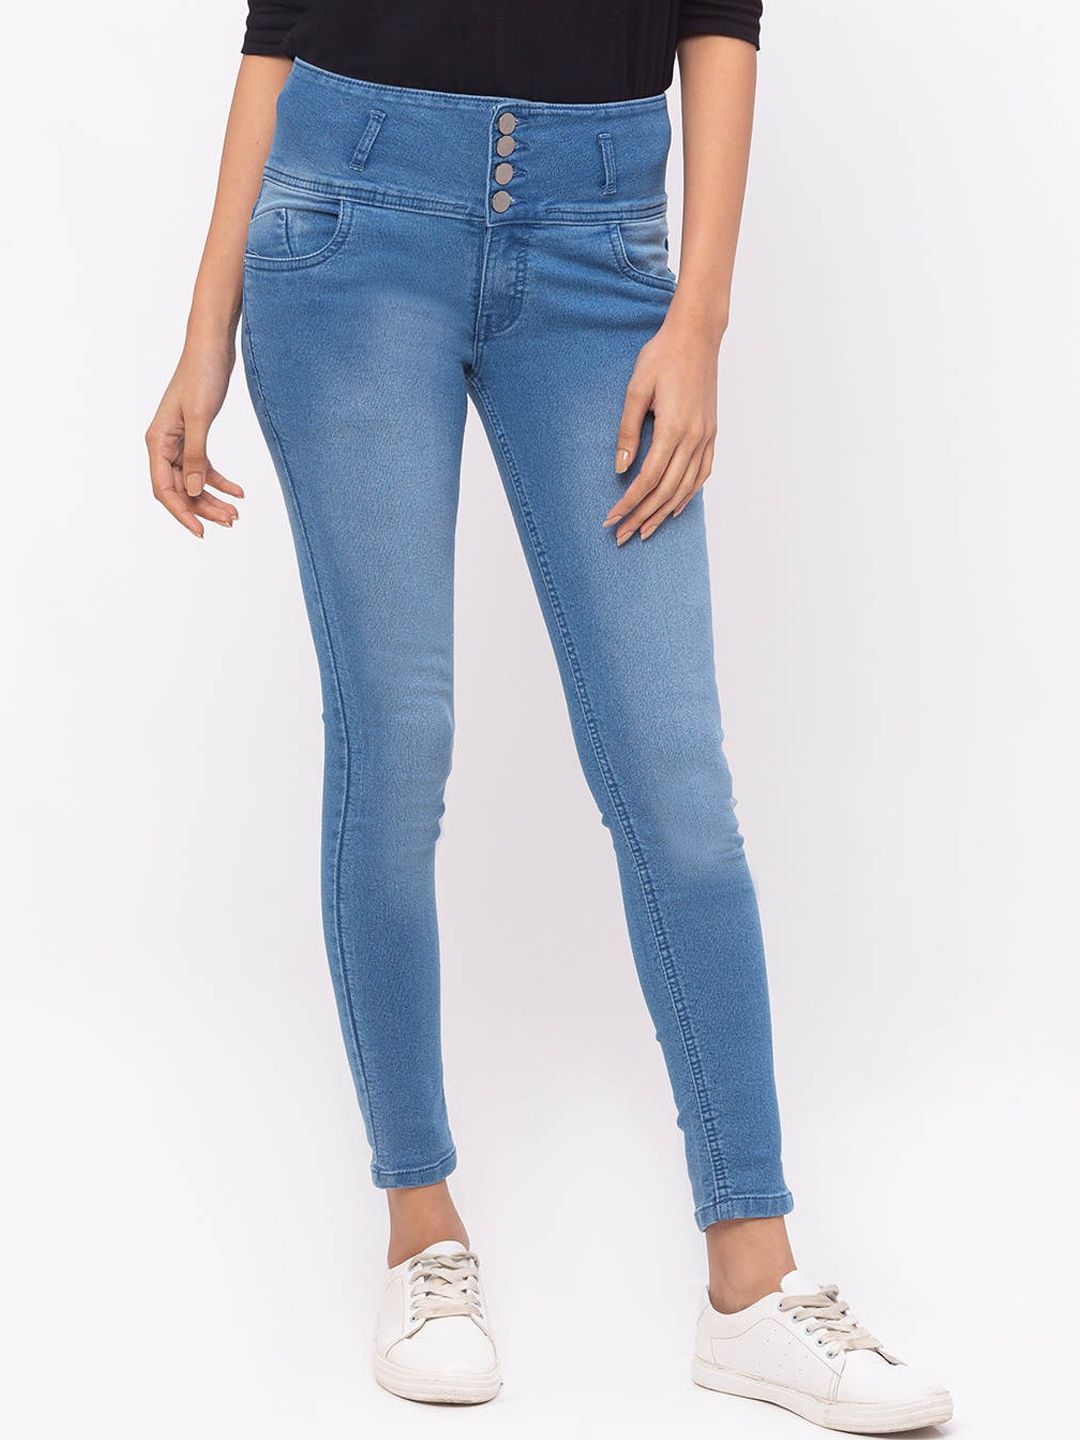 ZOLA Women Blue Slim Fit Jeans Price in India